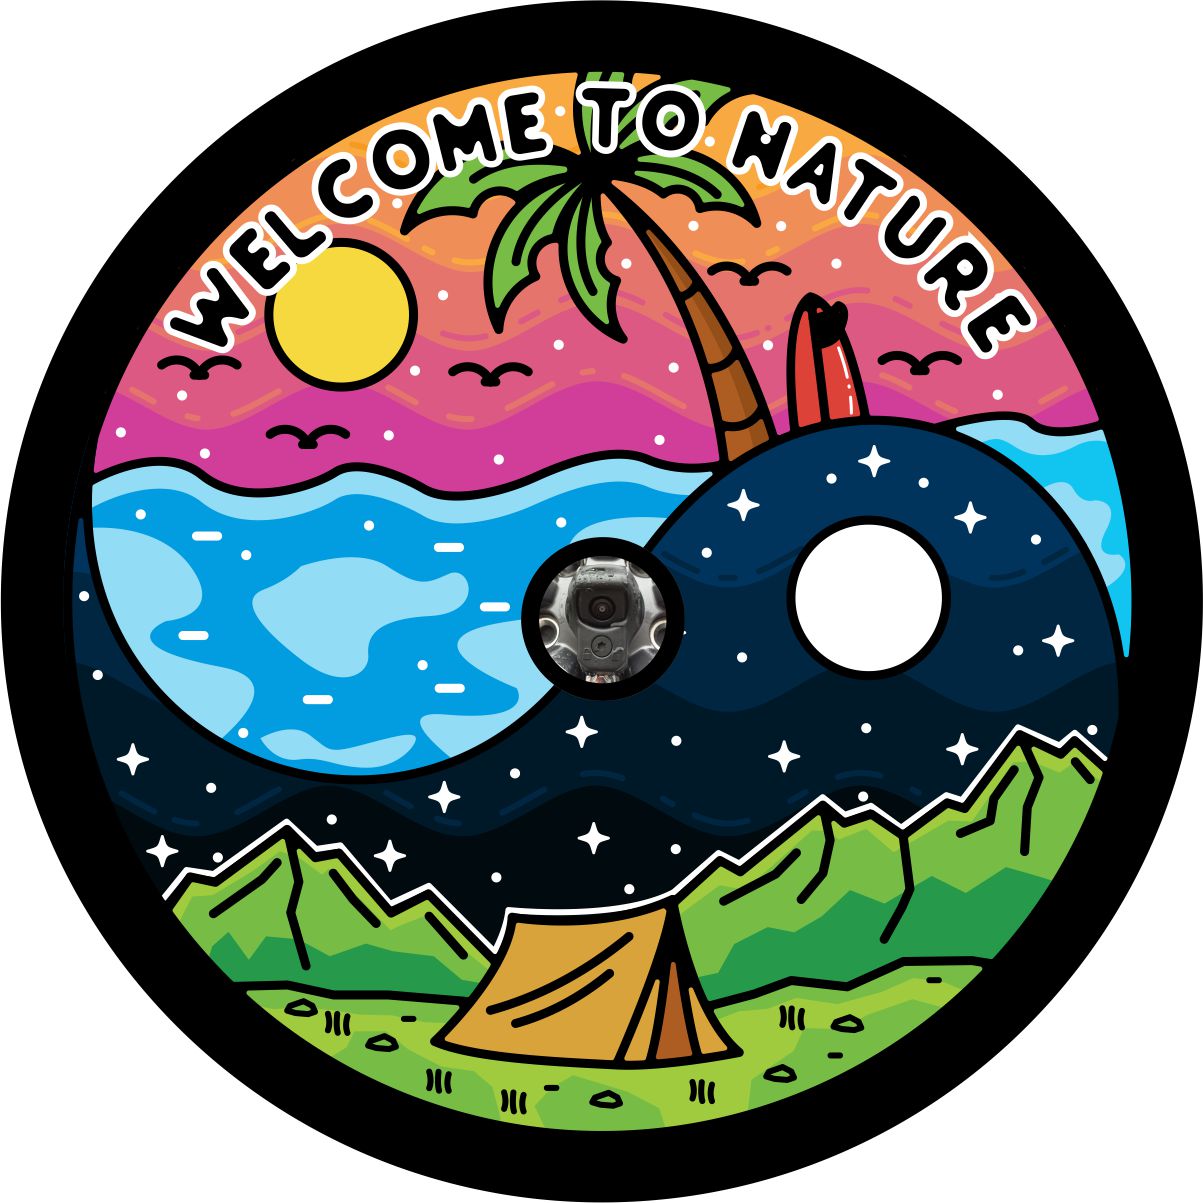 Creative and unique spare tire cover. Yin yang design with welcome to nature. Displaying the best of nature including the tropical coastal beach to camping under the stars in the mountains. Spare tire cover design with camera hole